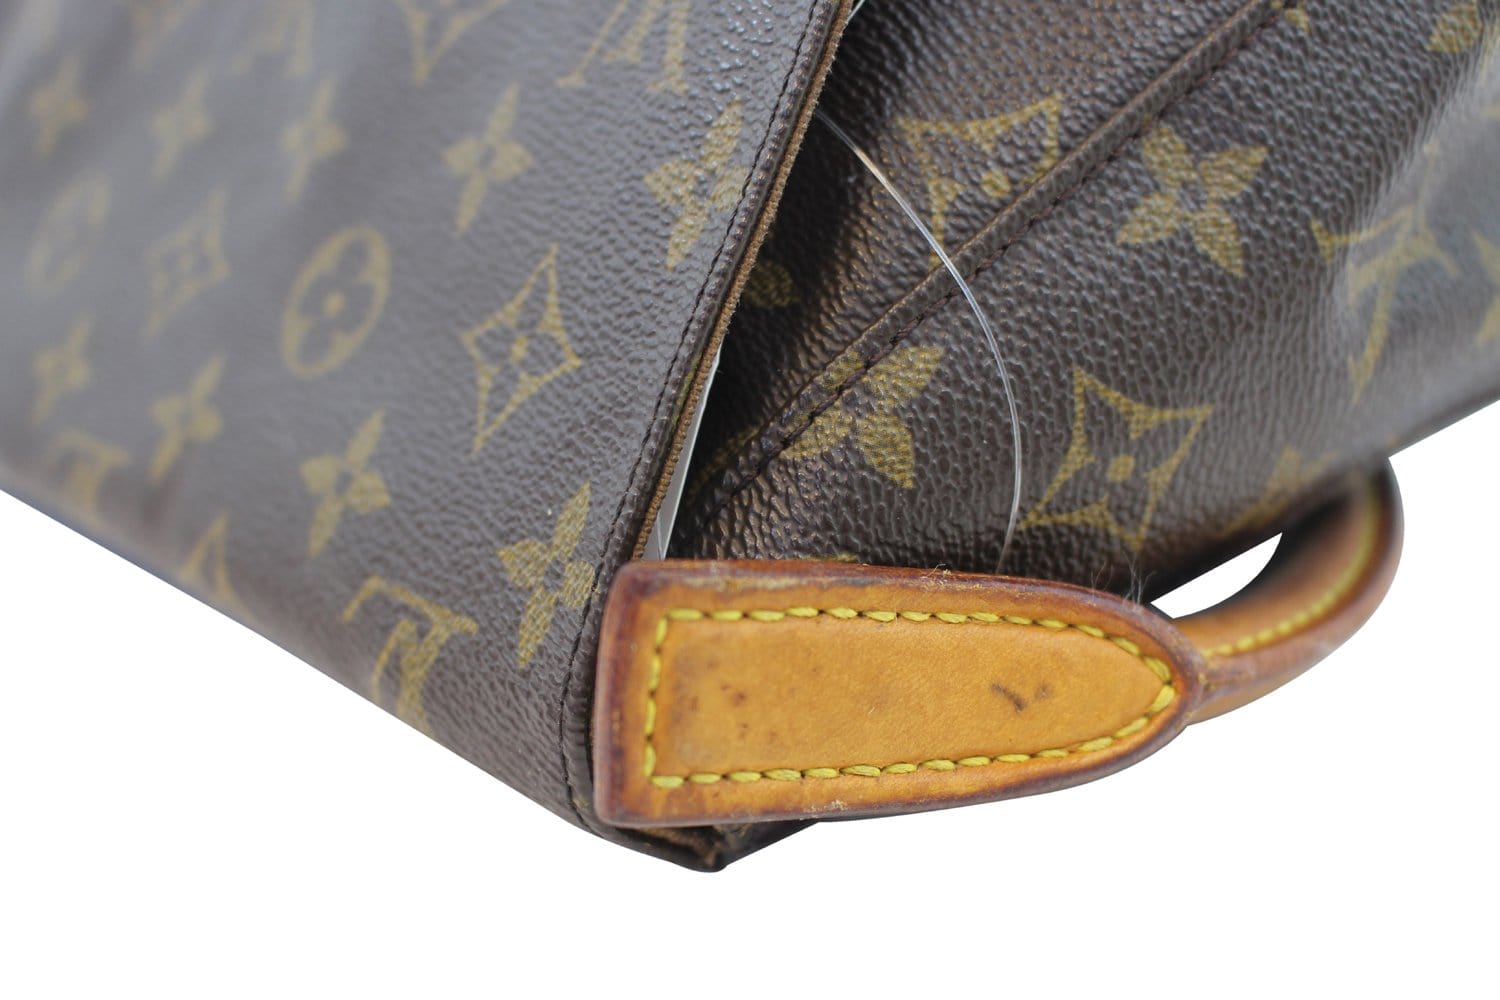 LV authentic large looping bag $575  Bags, Bags designer, Boutique design